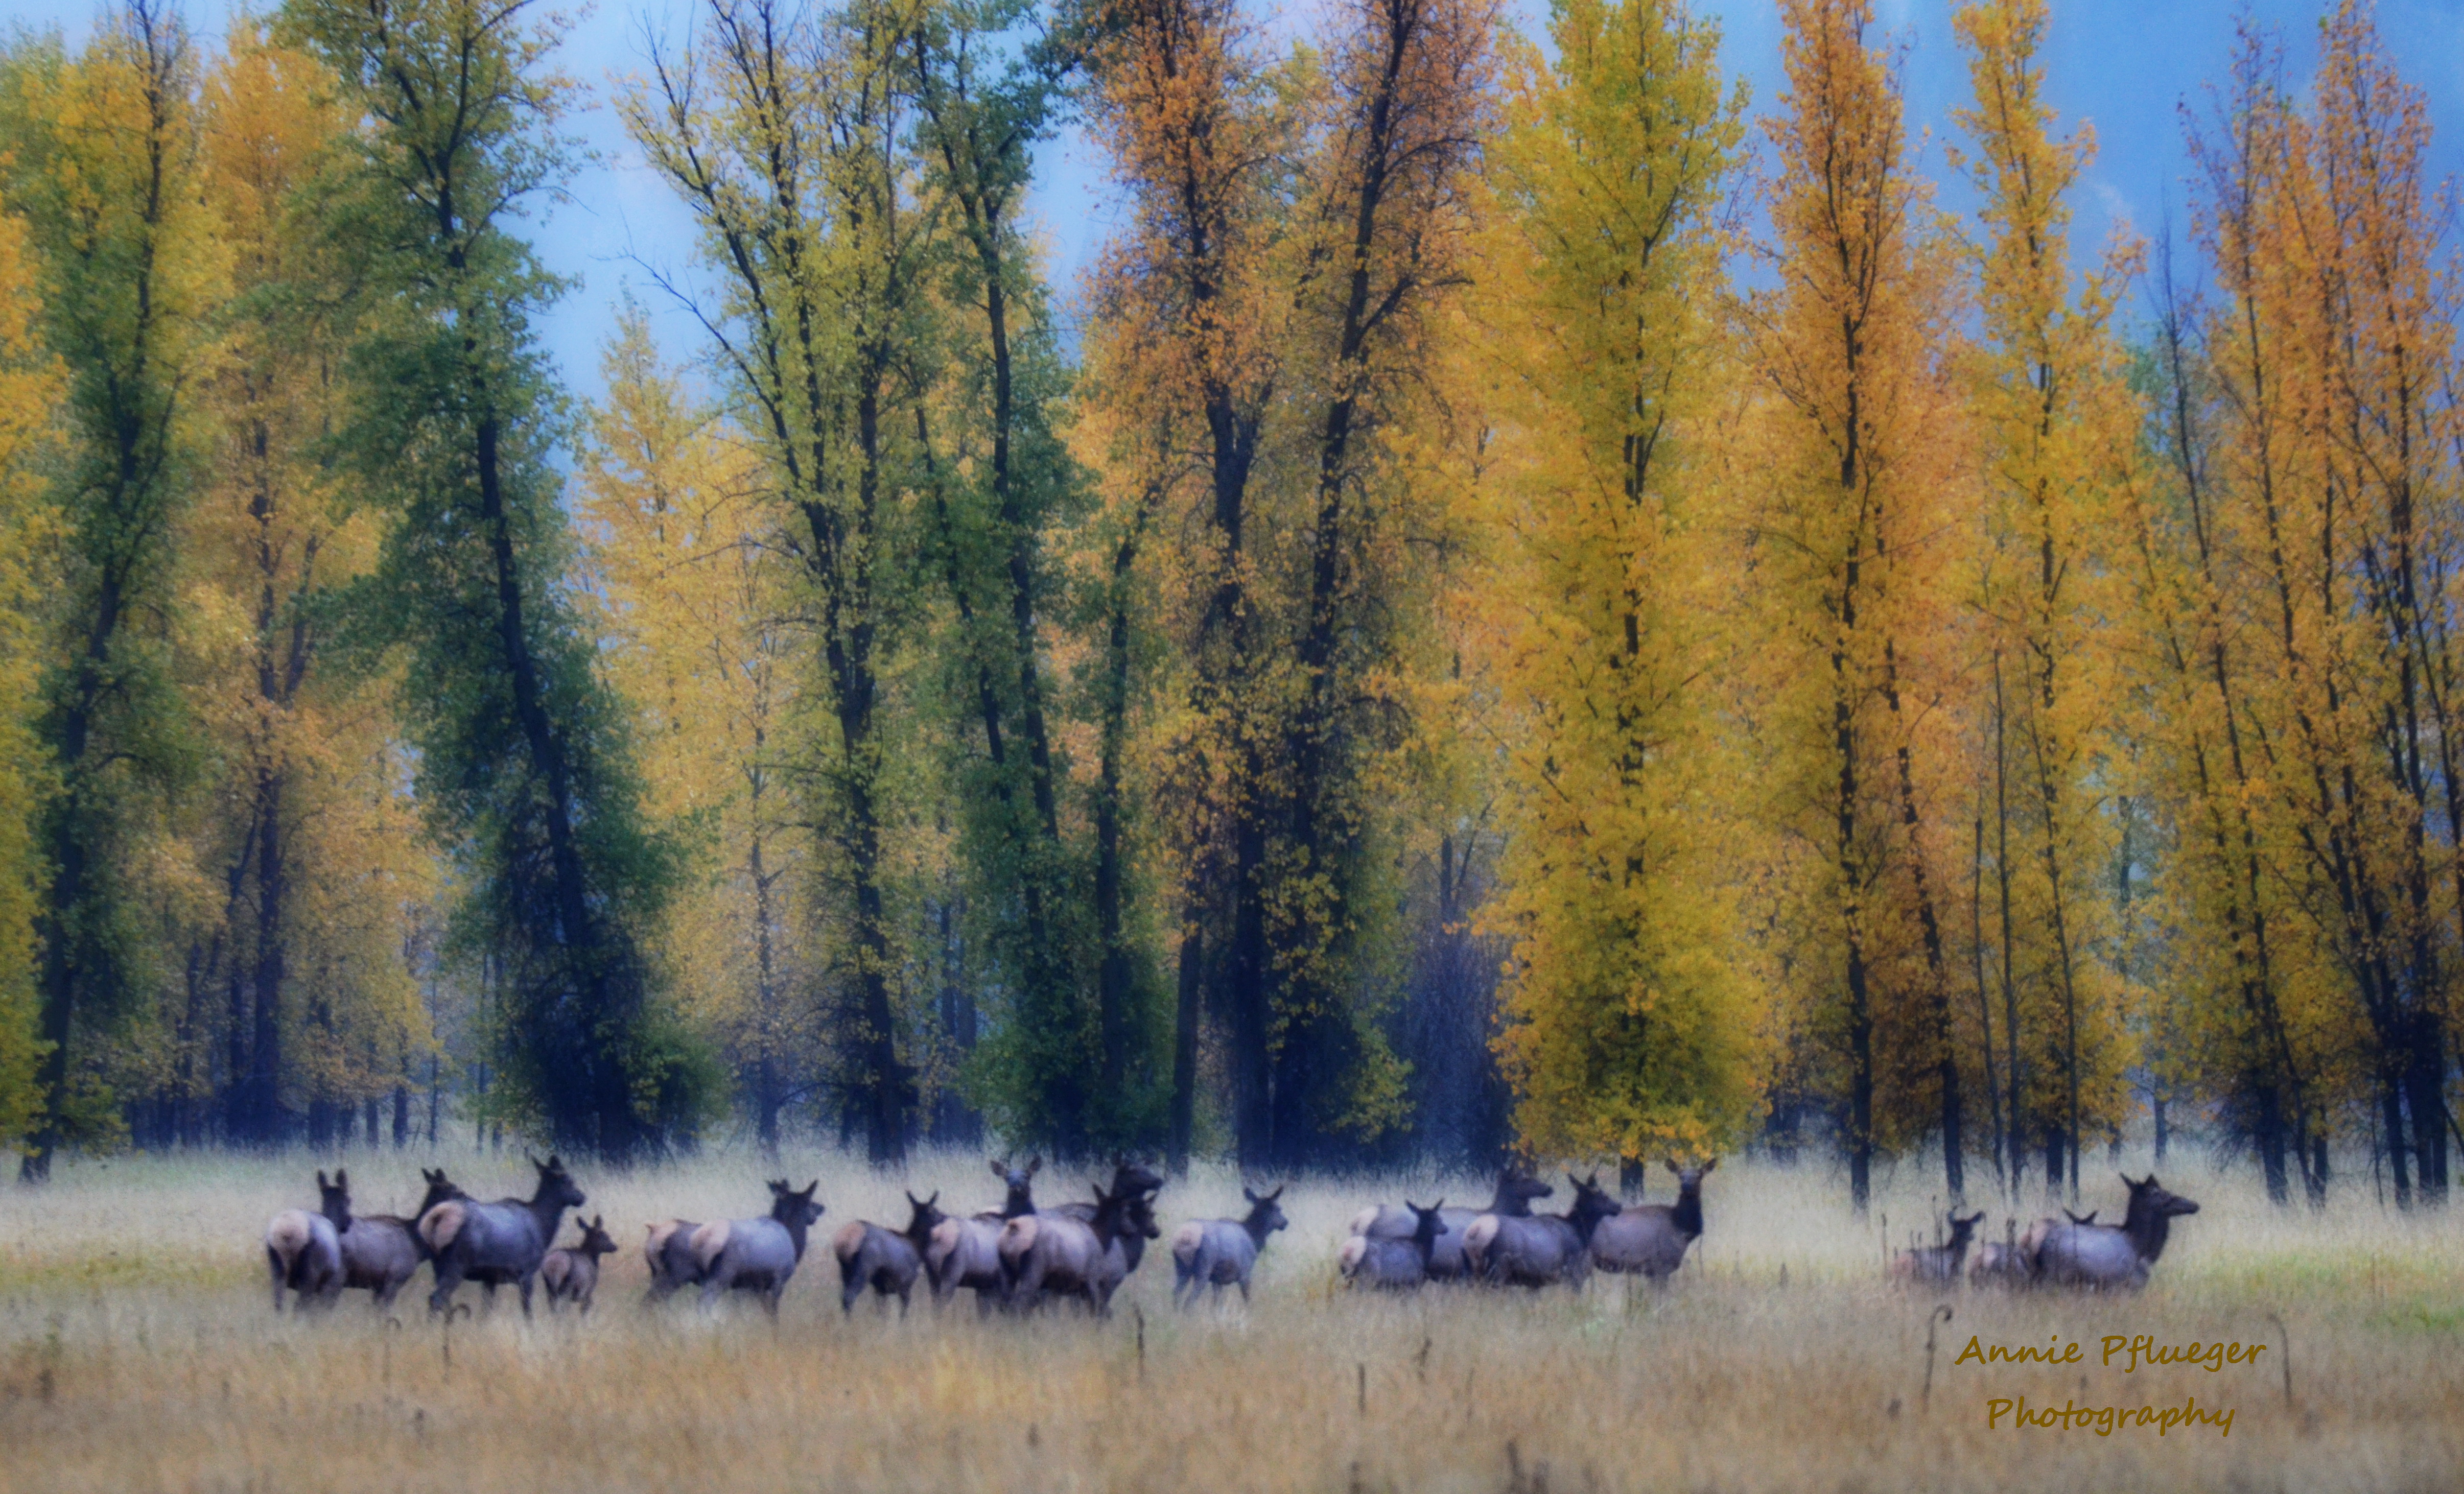 Elk herd in tall grass with autumn colored trees in background